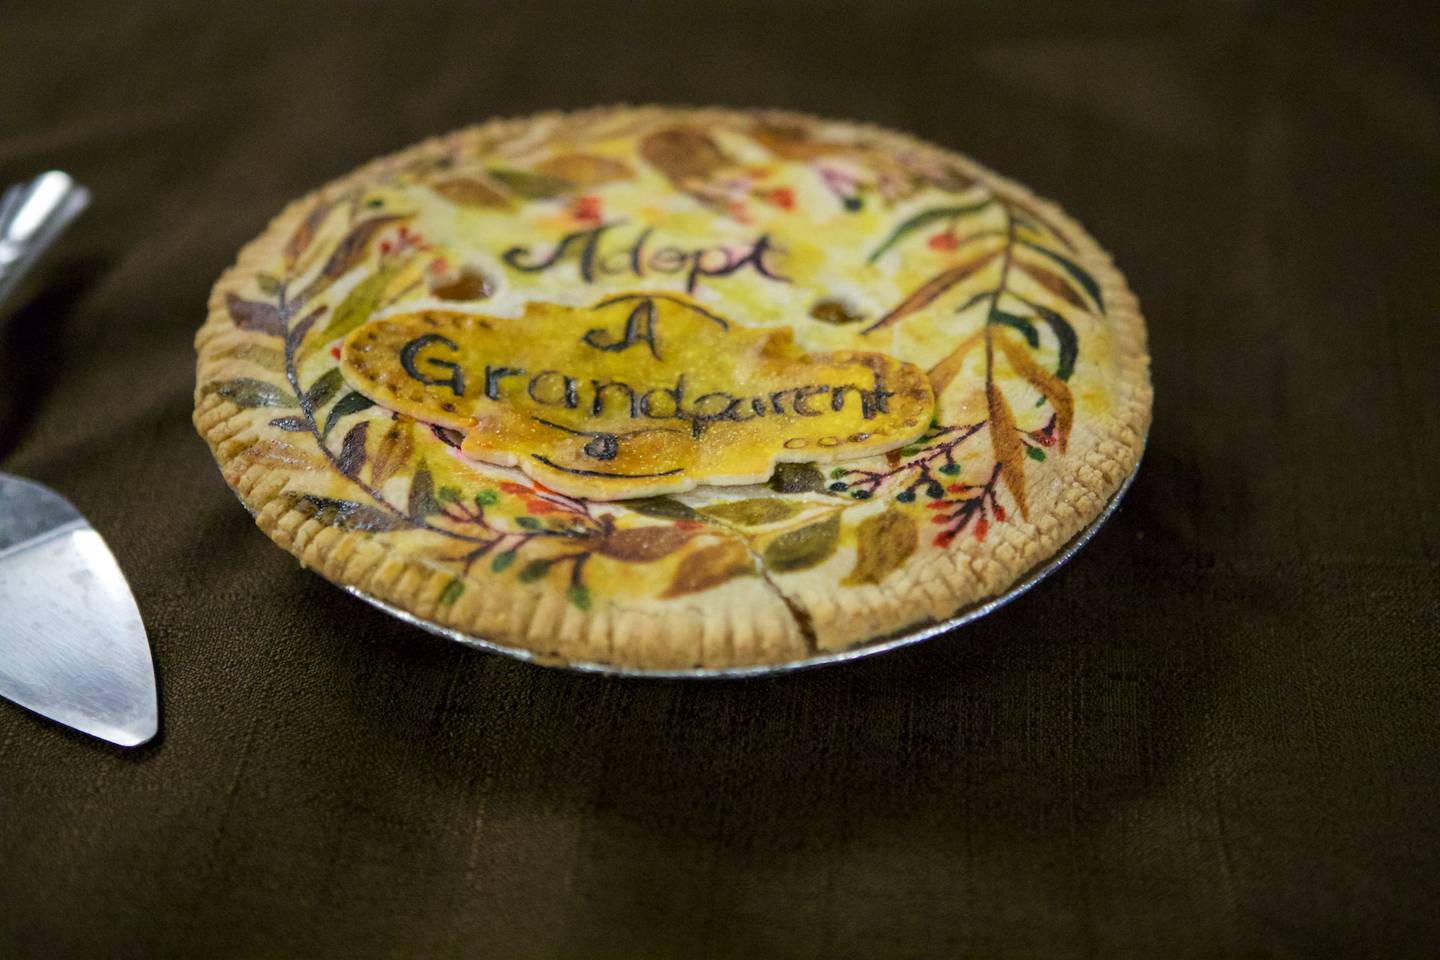 An adopt-a-grandparent pie for during a Thanksgiving dinner for residents at Gable Point Senior Housing on Saturday, Nov. 19, 2022, in Crystal Lake.